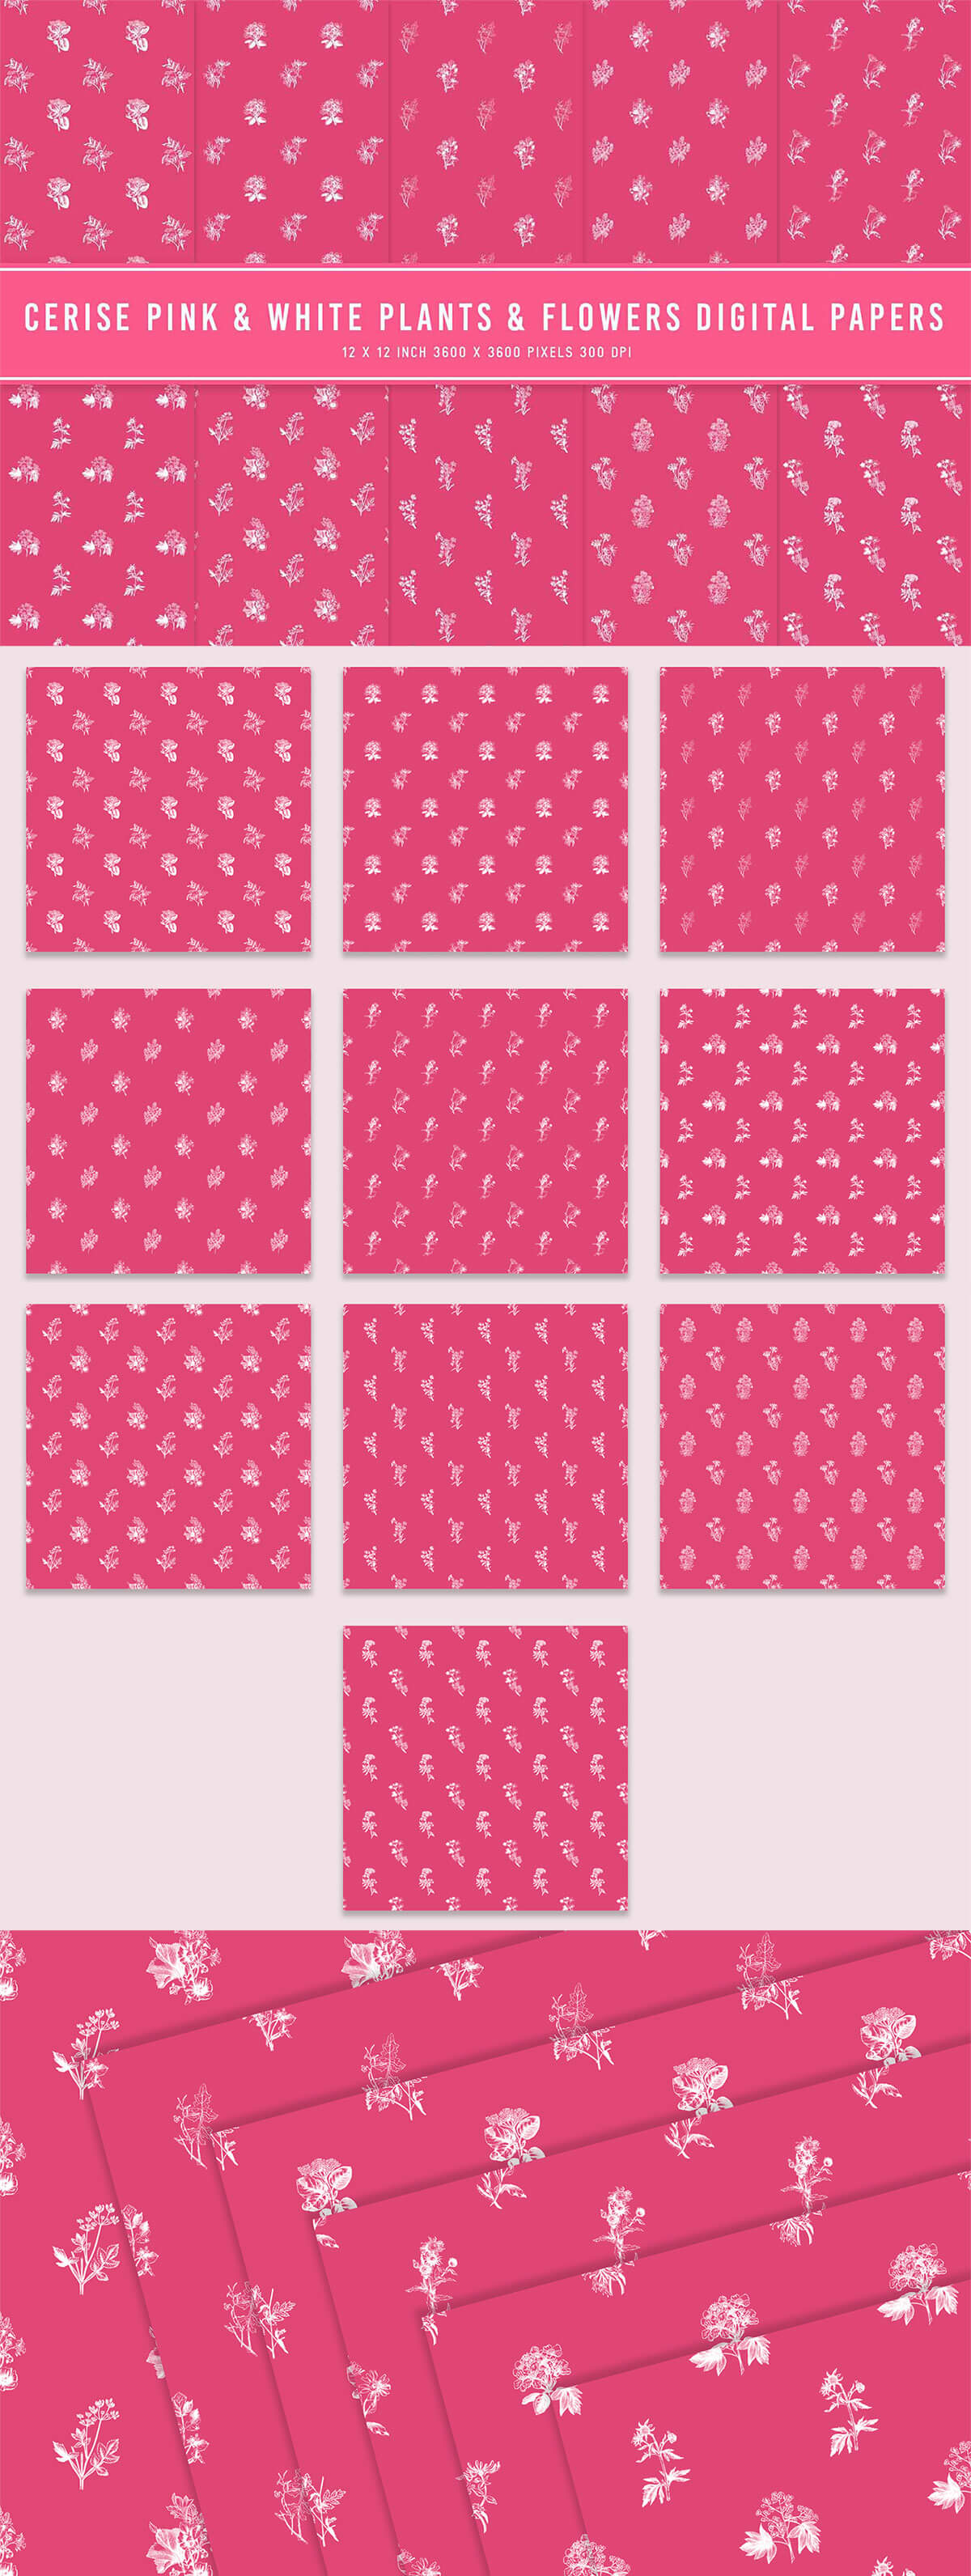 Cerise Pink & White Plants & Flowers Digital Papers